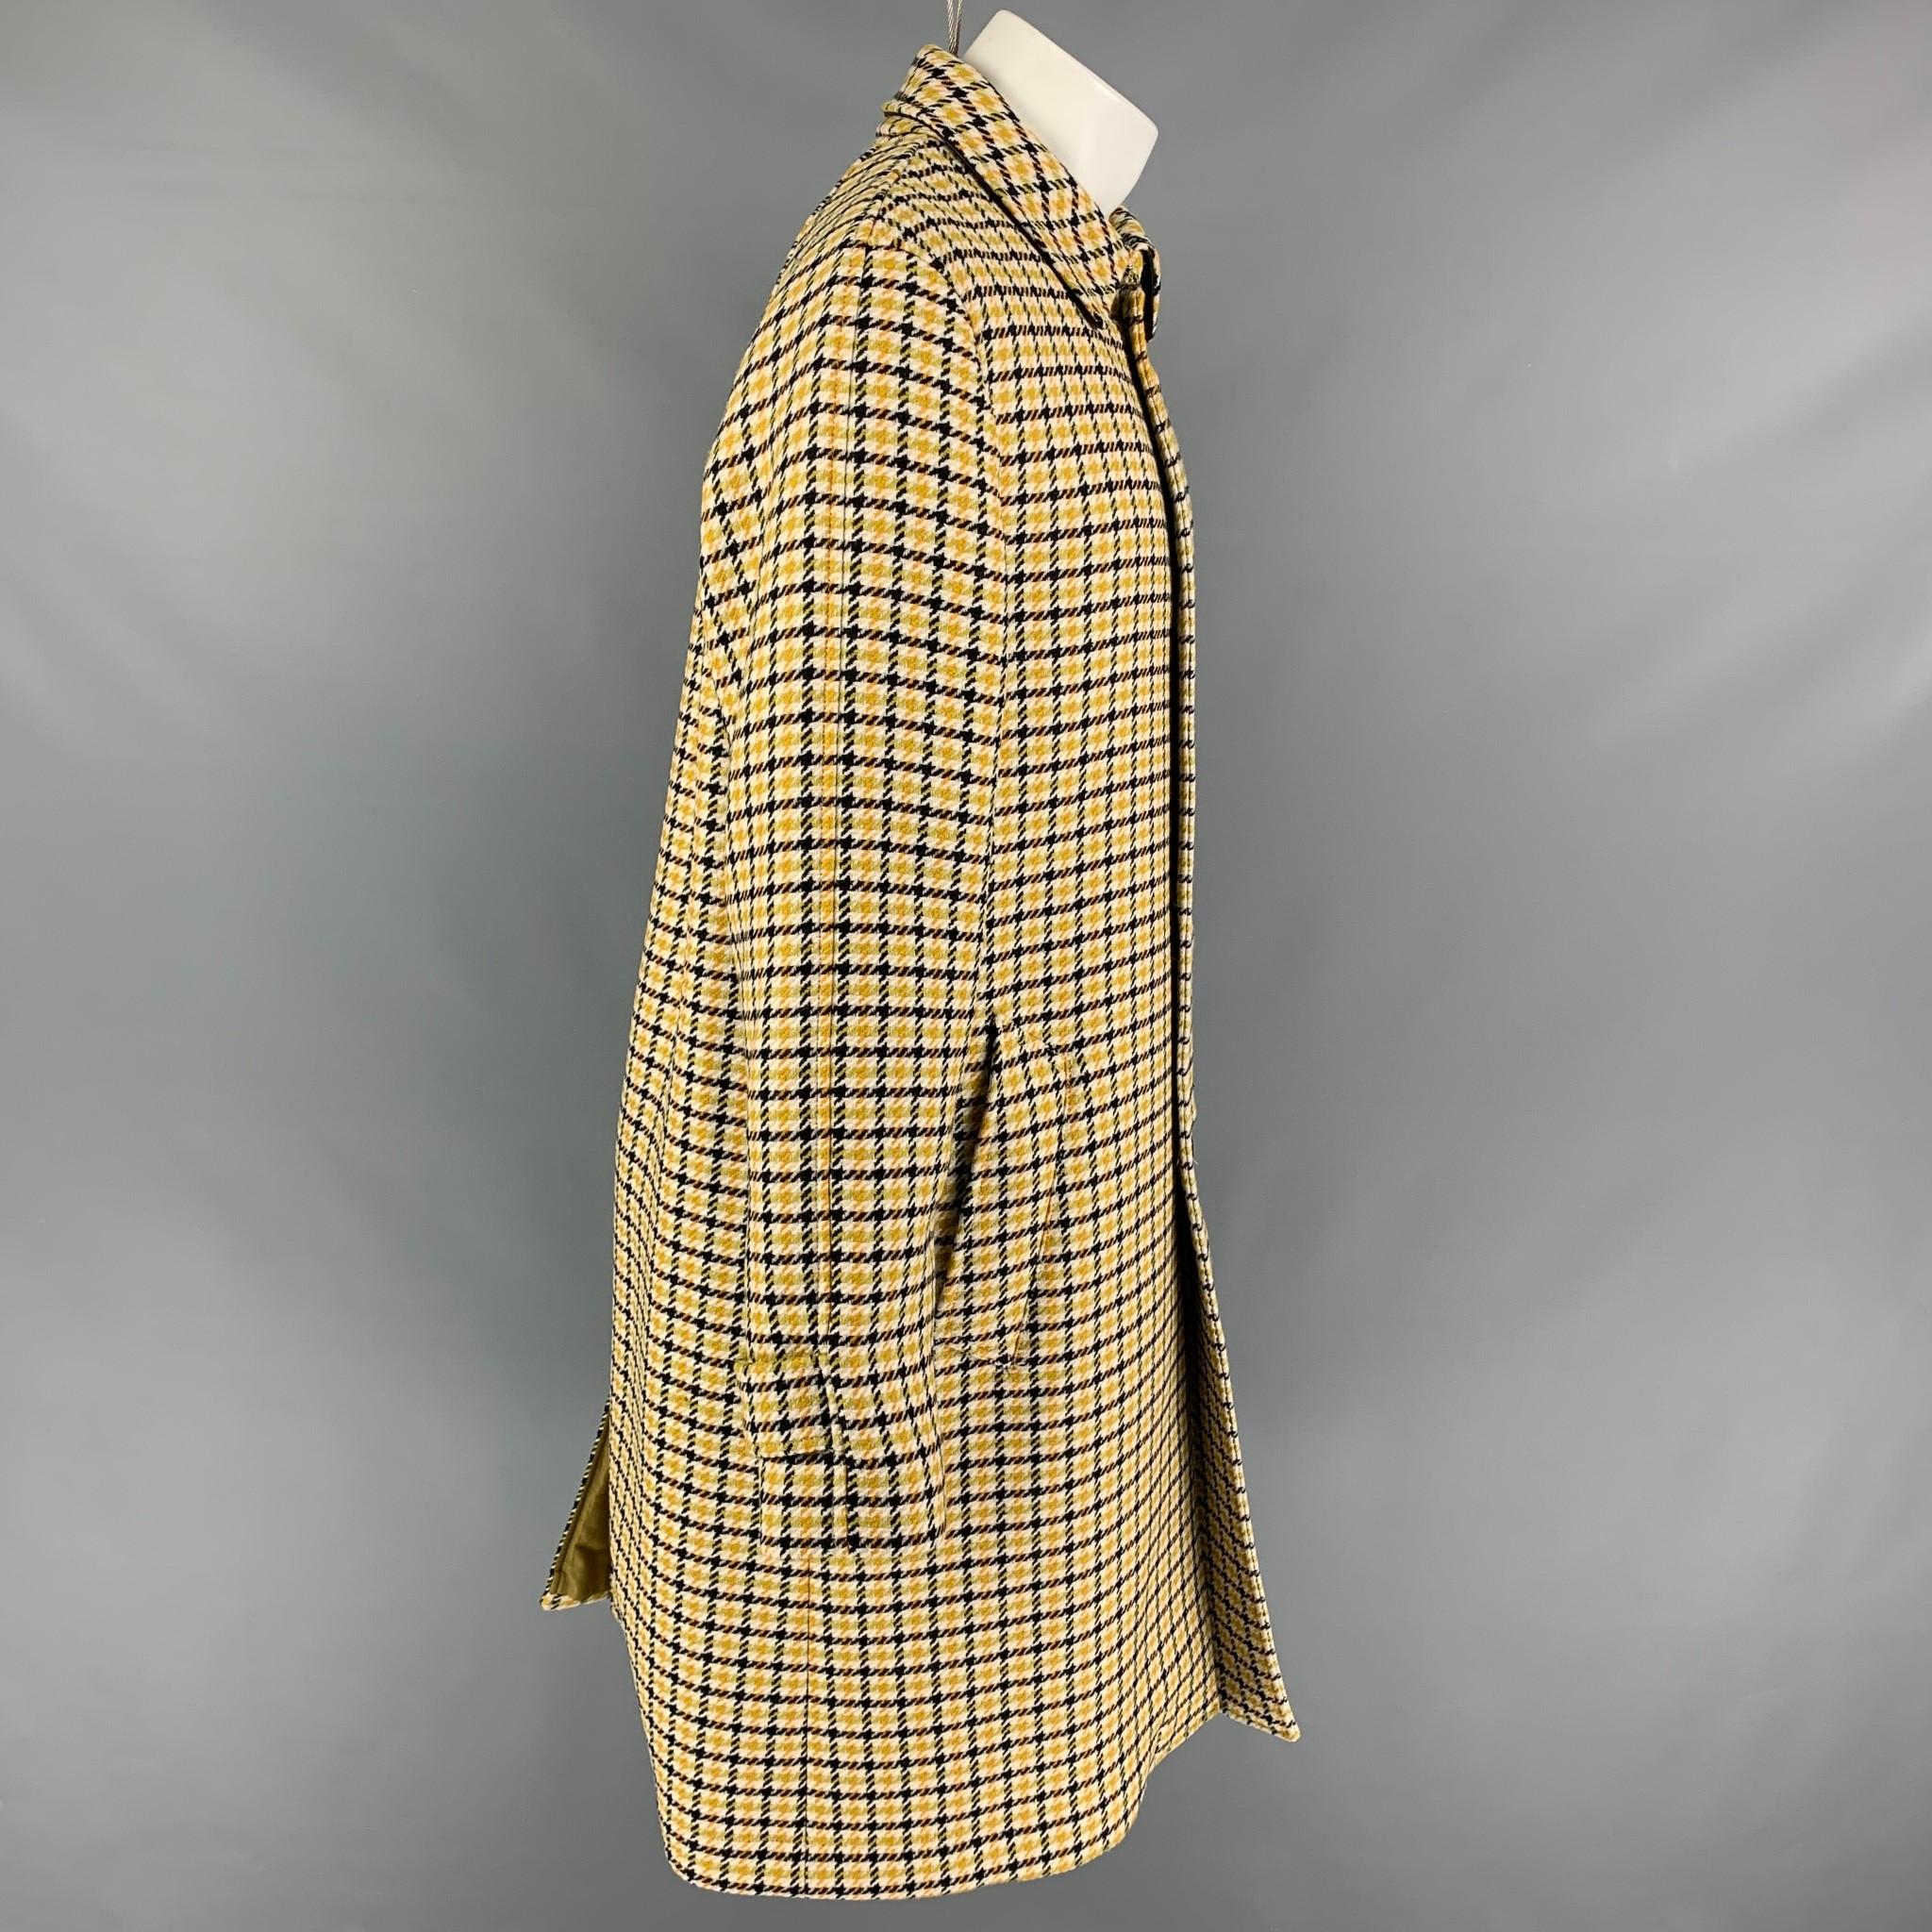 MARNI coat comes in yellow & black plaid wool wth a full liner featuring a loose fit, spread collar, leather trim, slit pockets, and a buttoned closure. Made in Italy. 

Excellent Pre-Owned Condition.
Marked: 48
Original Retail Price: